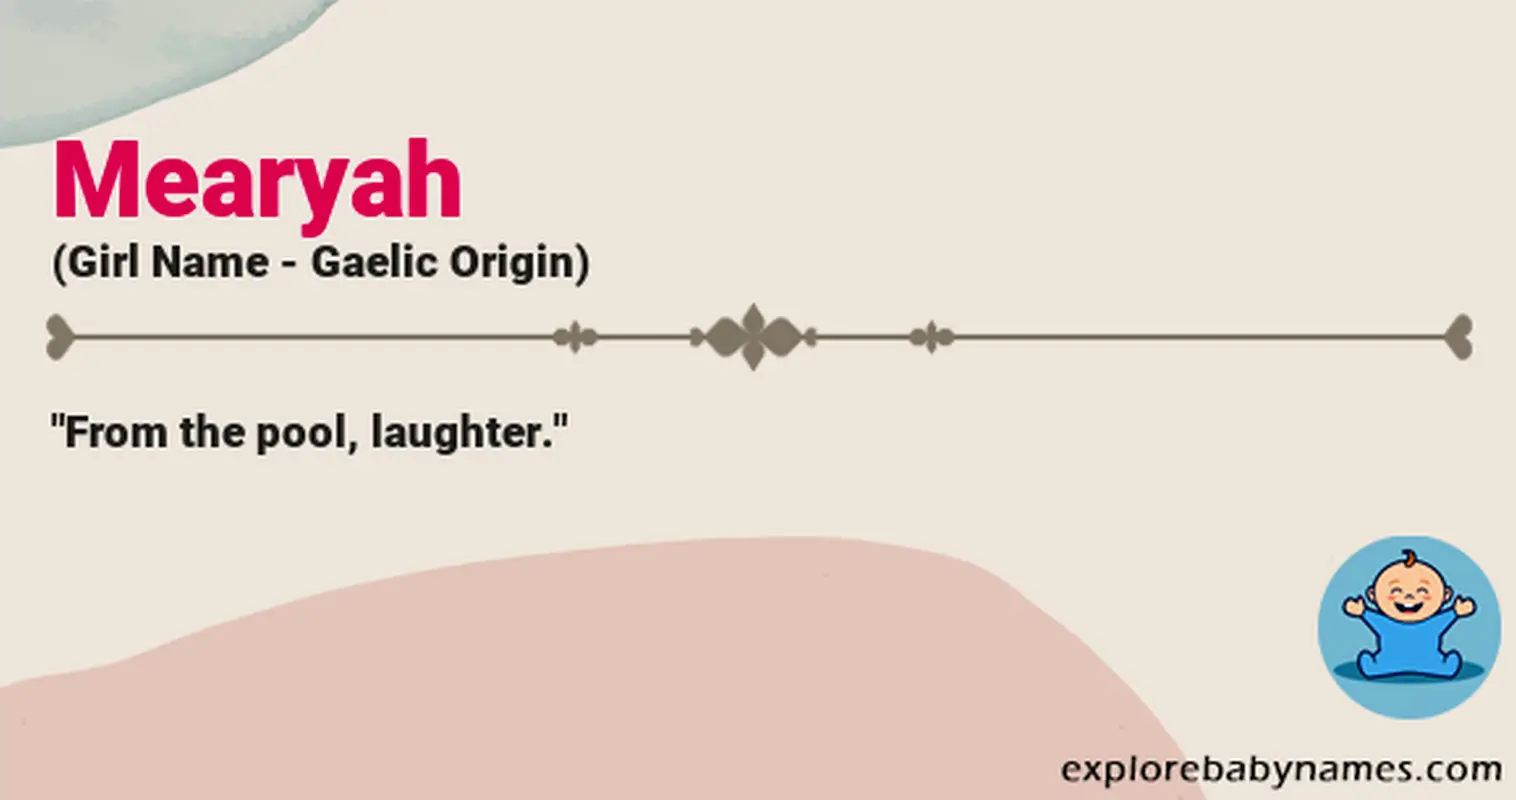 Meaning of Mearyah